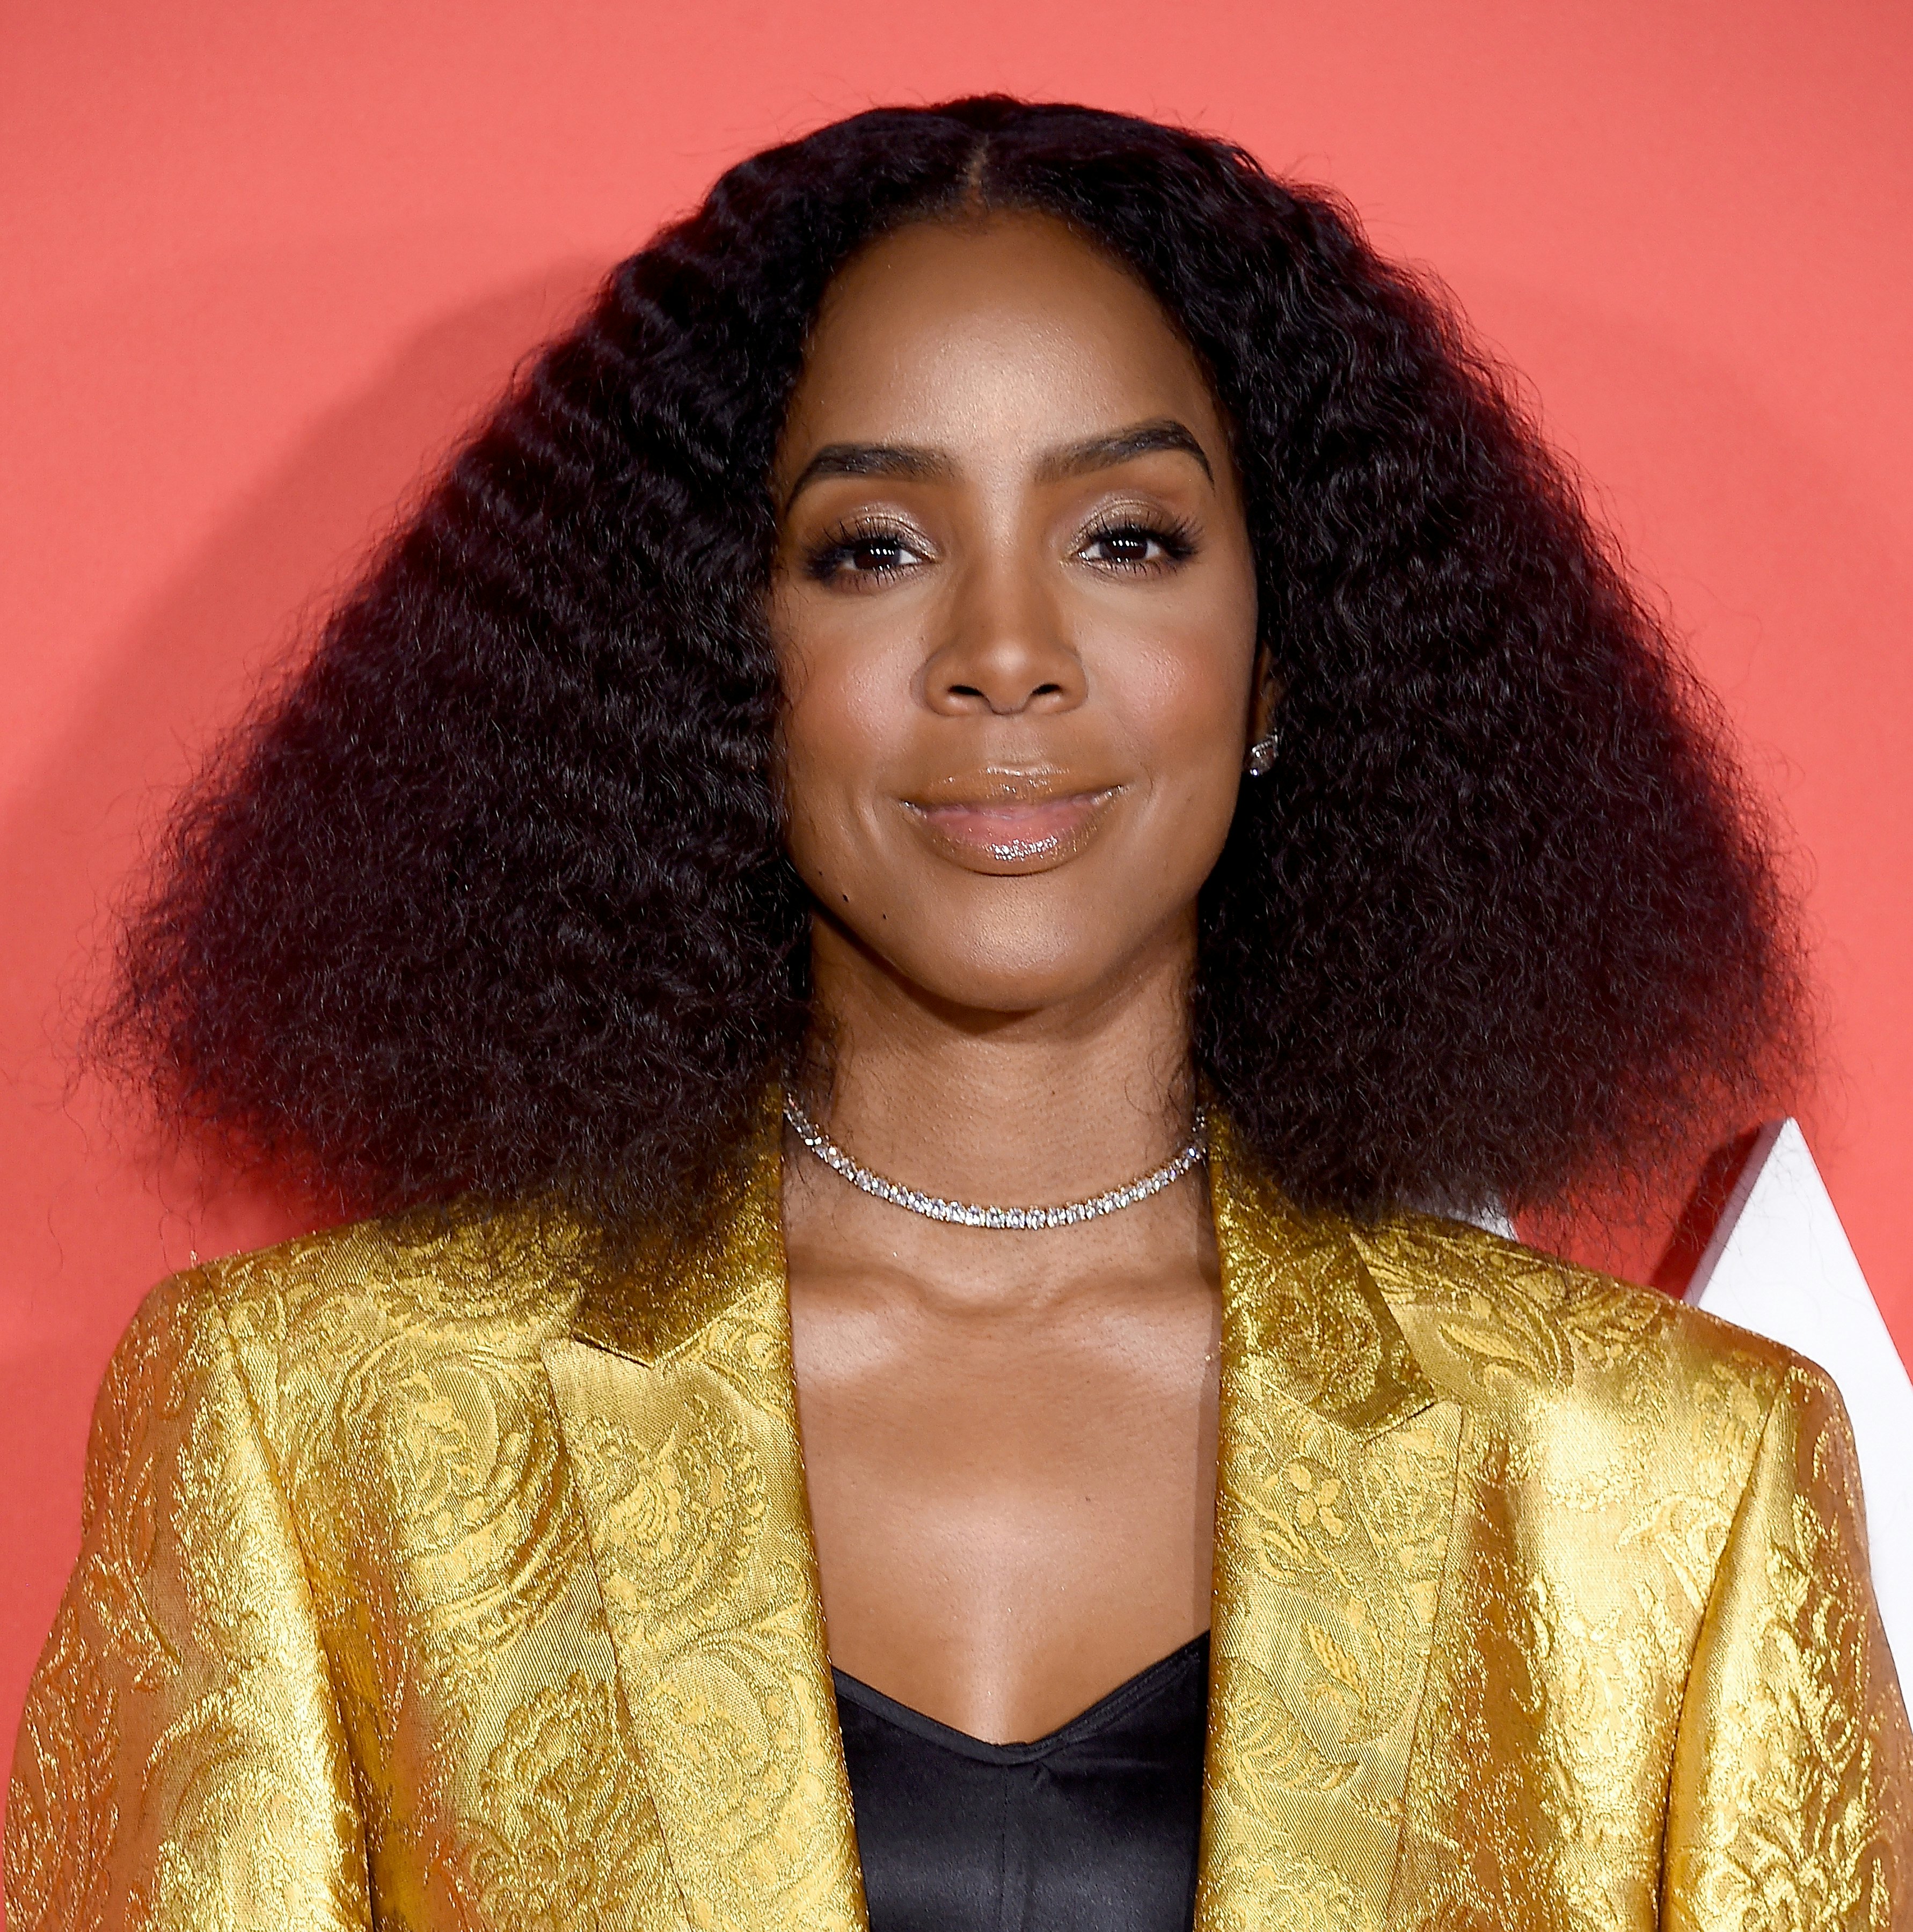 Go Kelly, Go! 2019 Is Shaping Up For Kelly Rowland & Her New